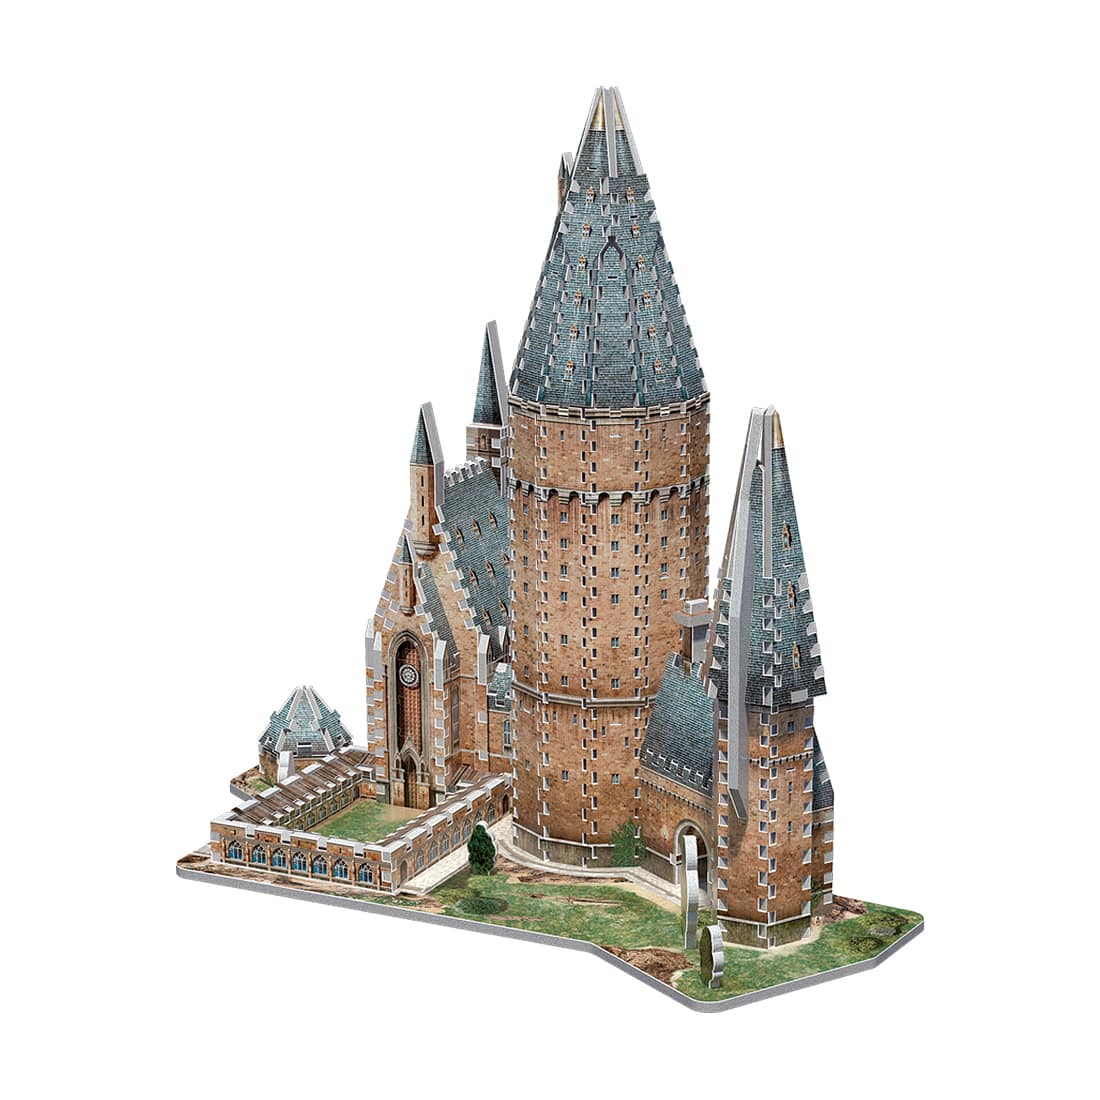 Revell 00300-3d-Puzzle-harry potter Hogwarts greathall-nuevo 